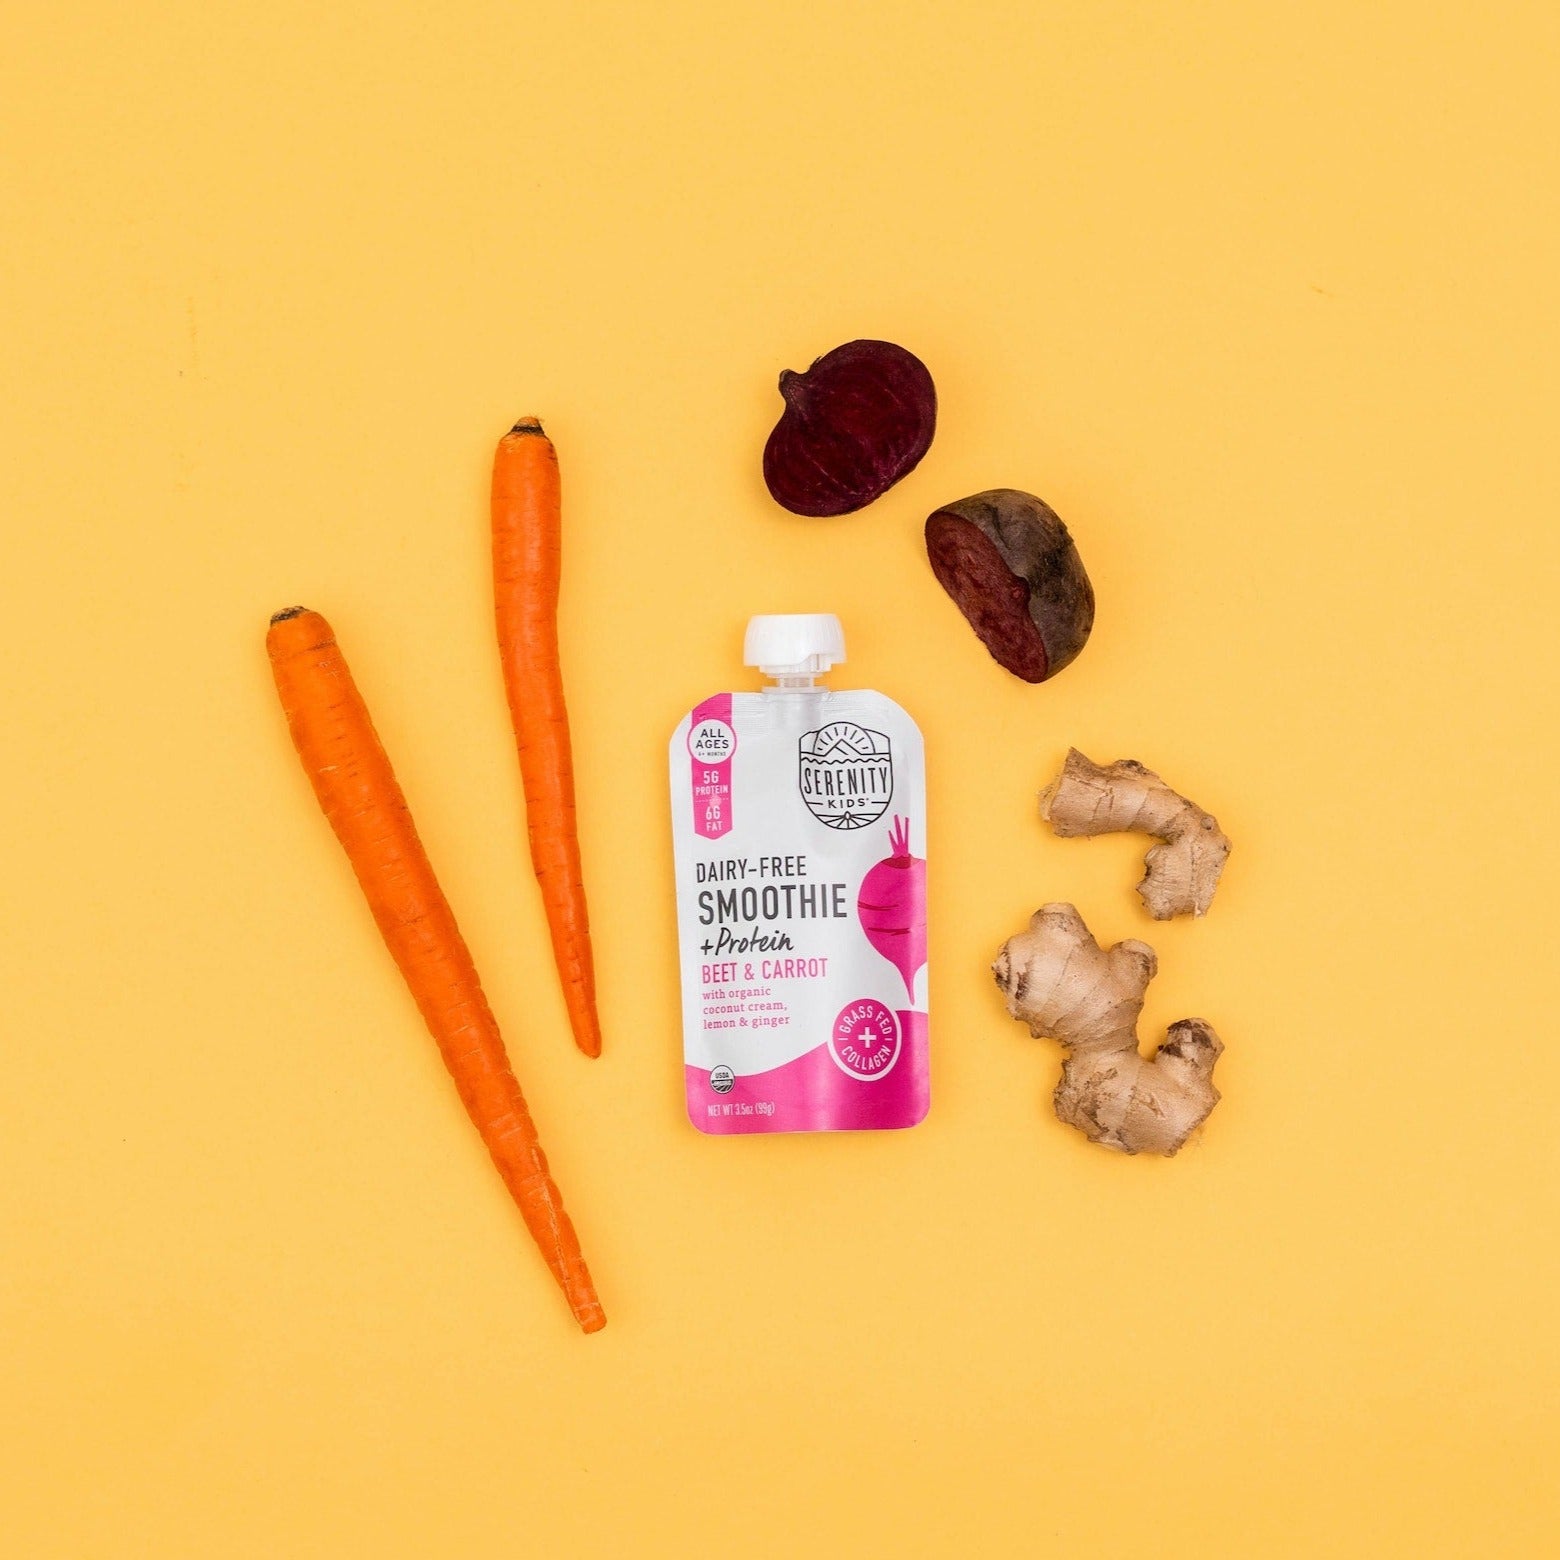 Beet & Carrot Dairy-Free Smoothie + Protein - Serenity Kids - Smoothie Combo Ingredients